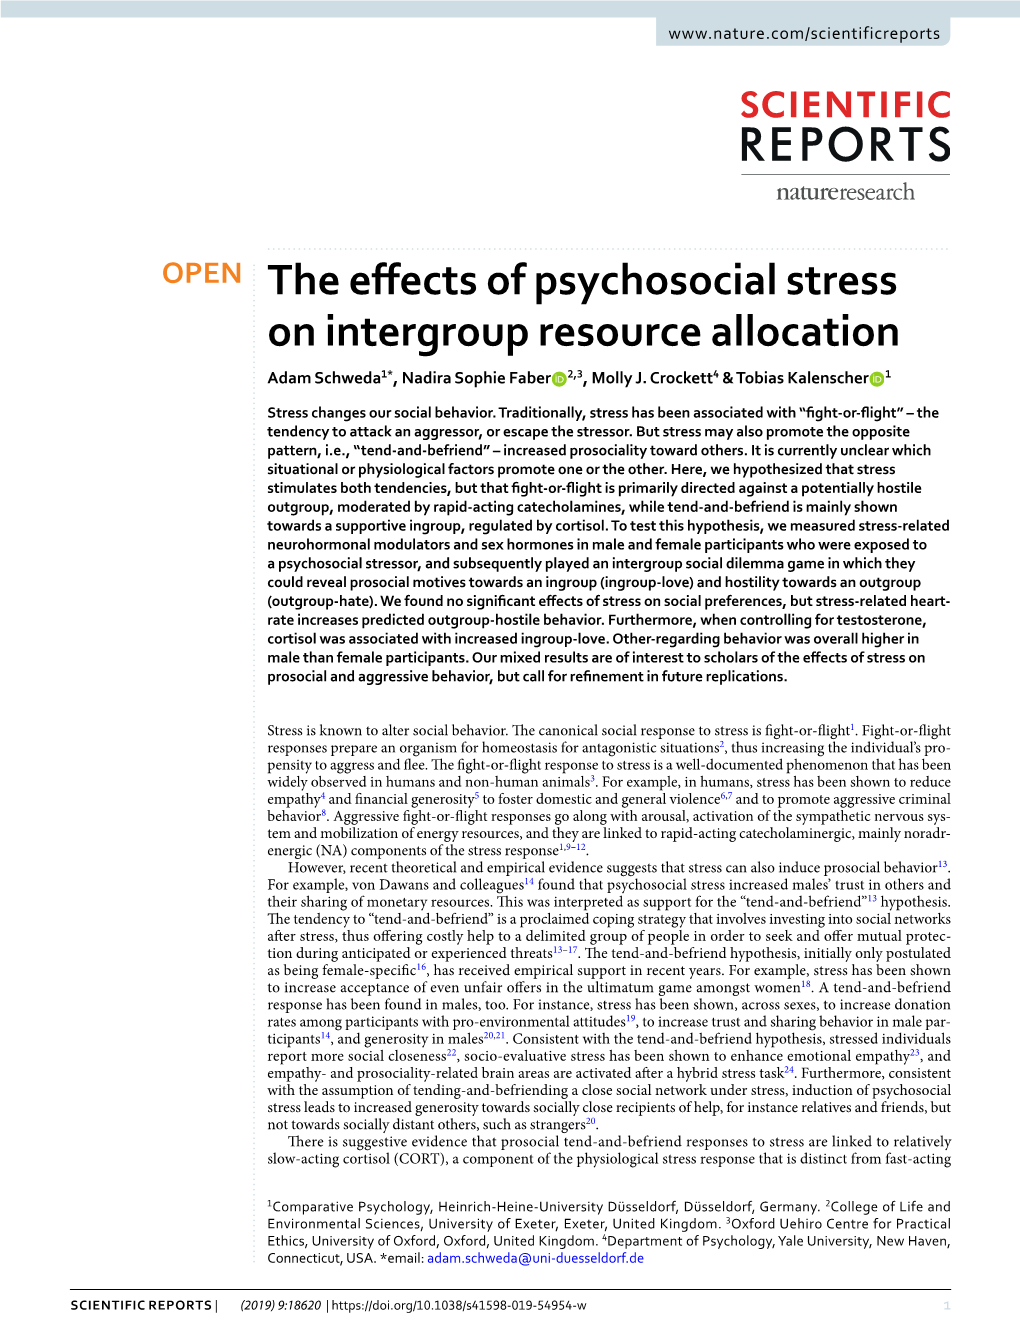 The Effects of Psychosocial Stress on Intergroup Resource Allocation